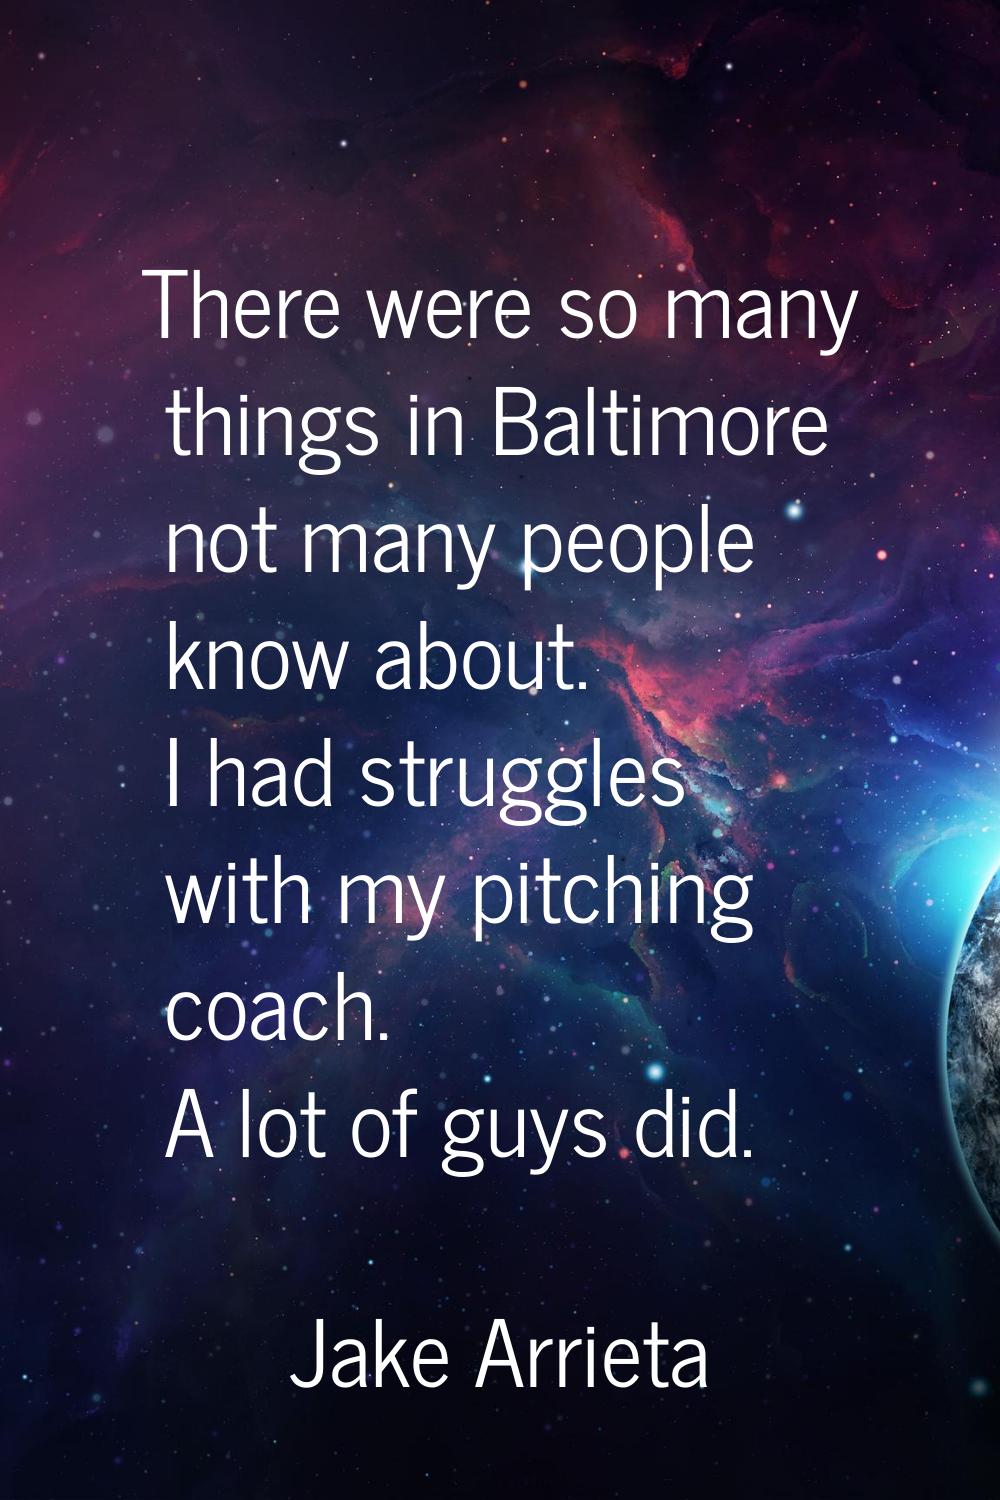 There were so many things in Baltimore not many people know about. I had struggles with my pitching